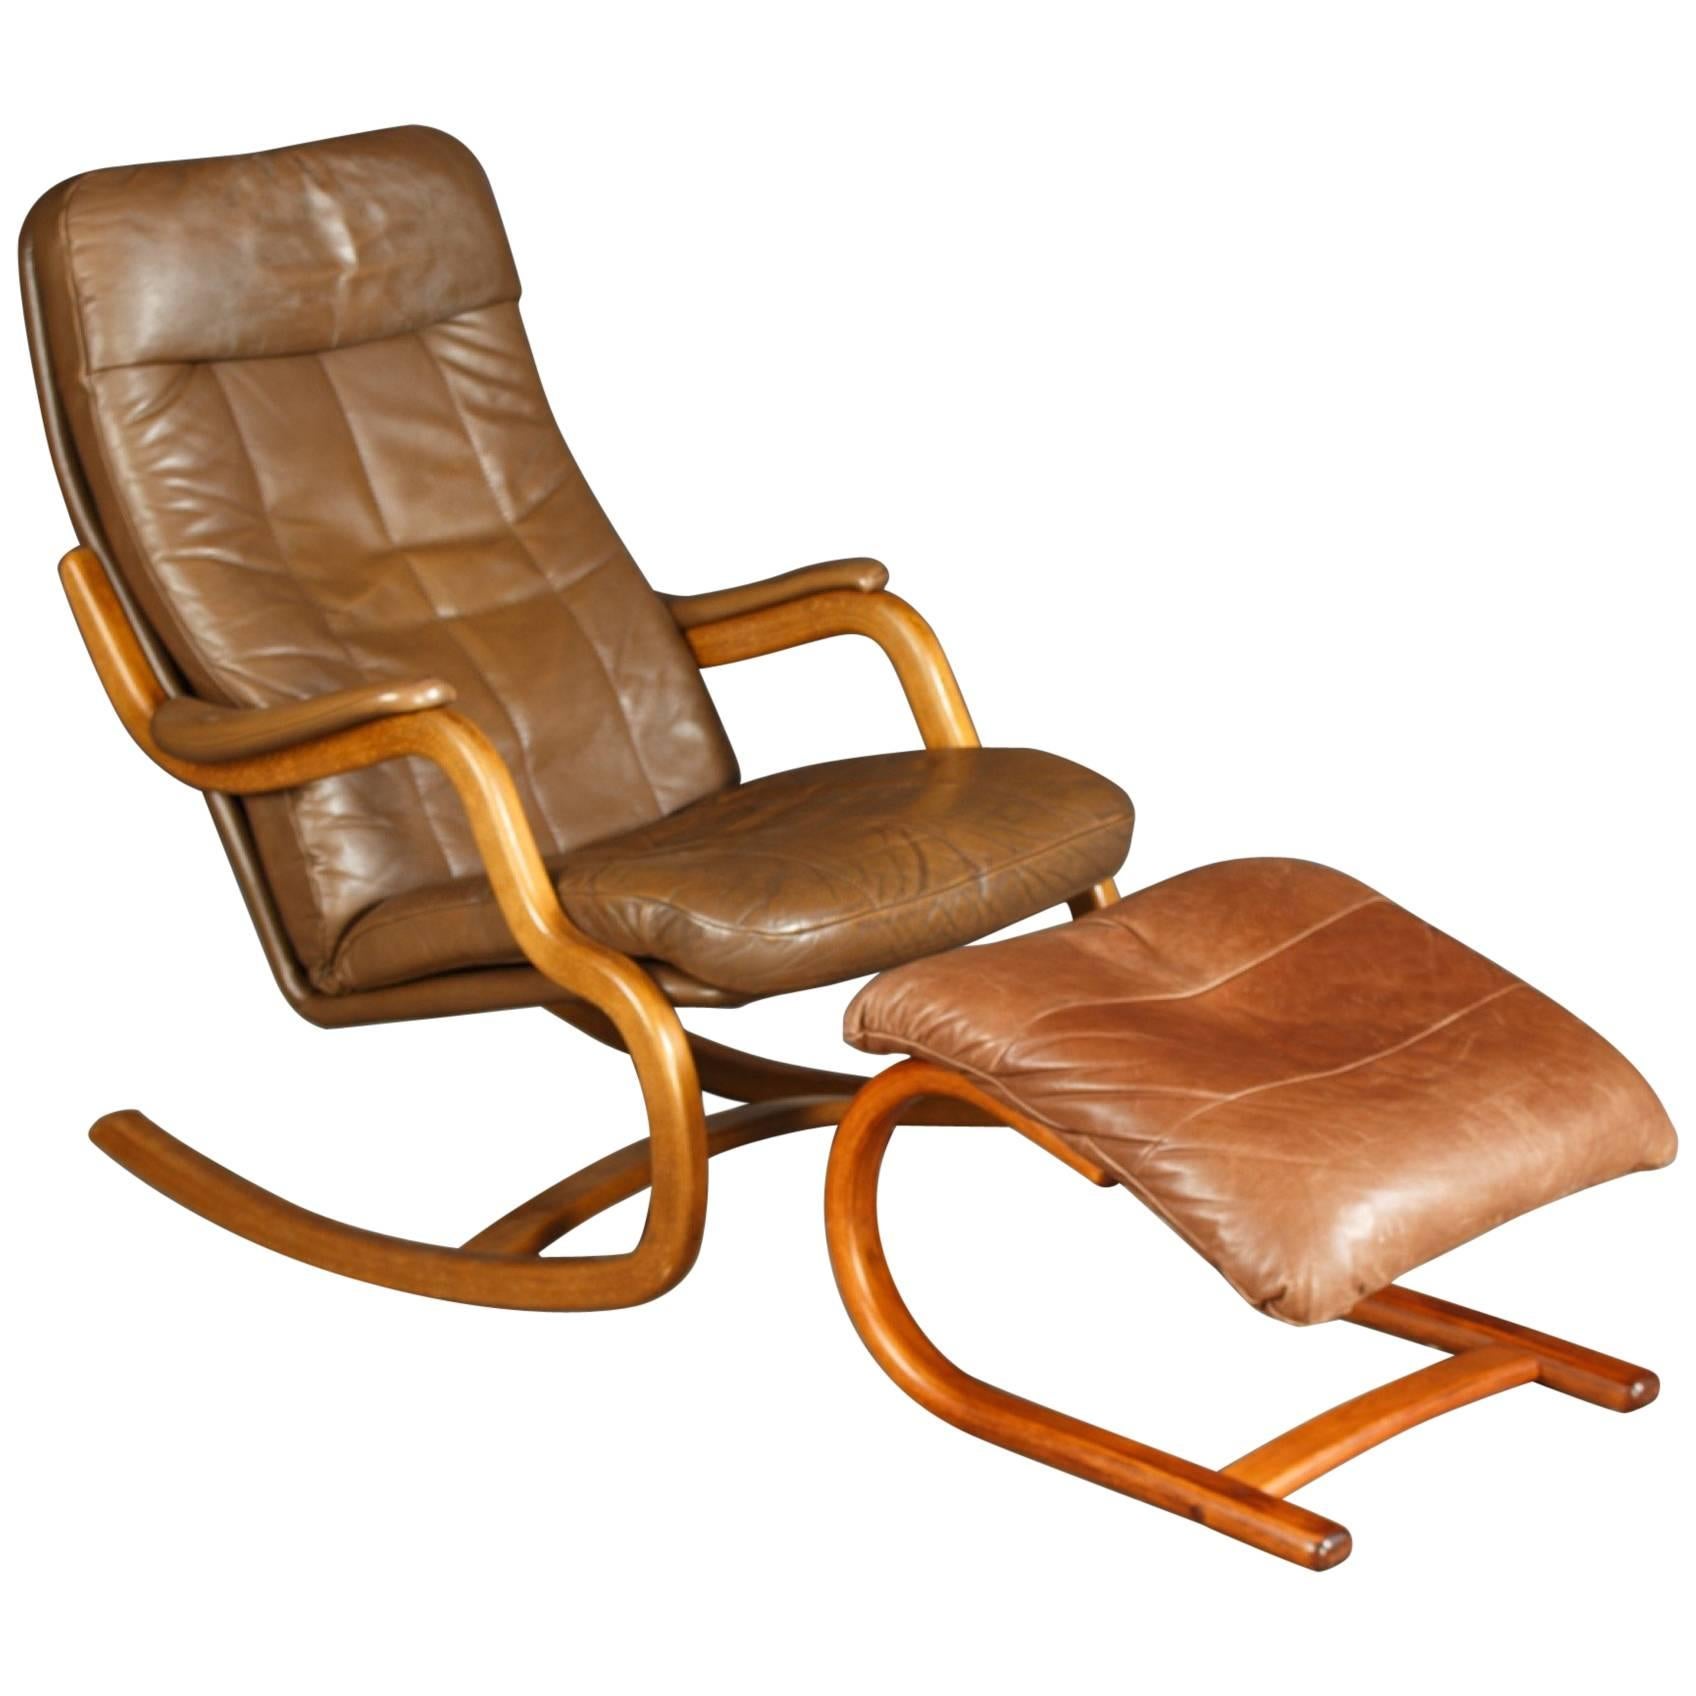 Midcentury Danish Lounge Chair with Ottoman and Leather Cushions